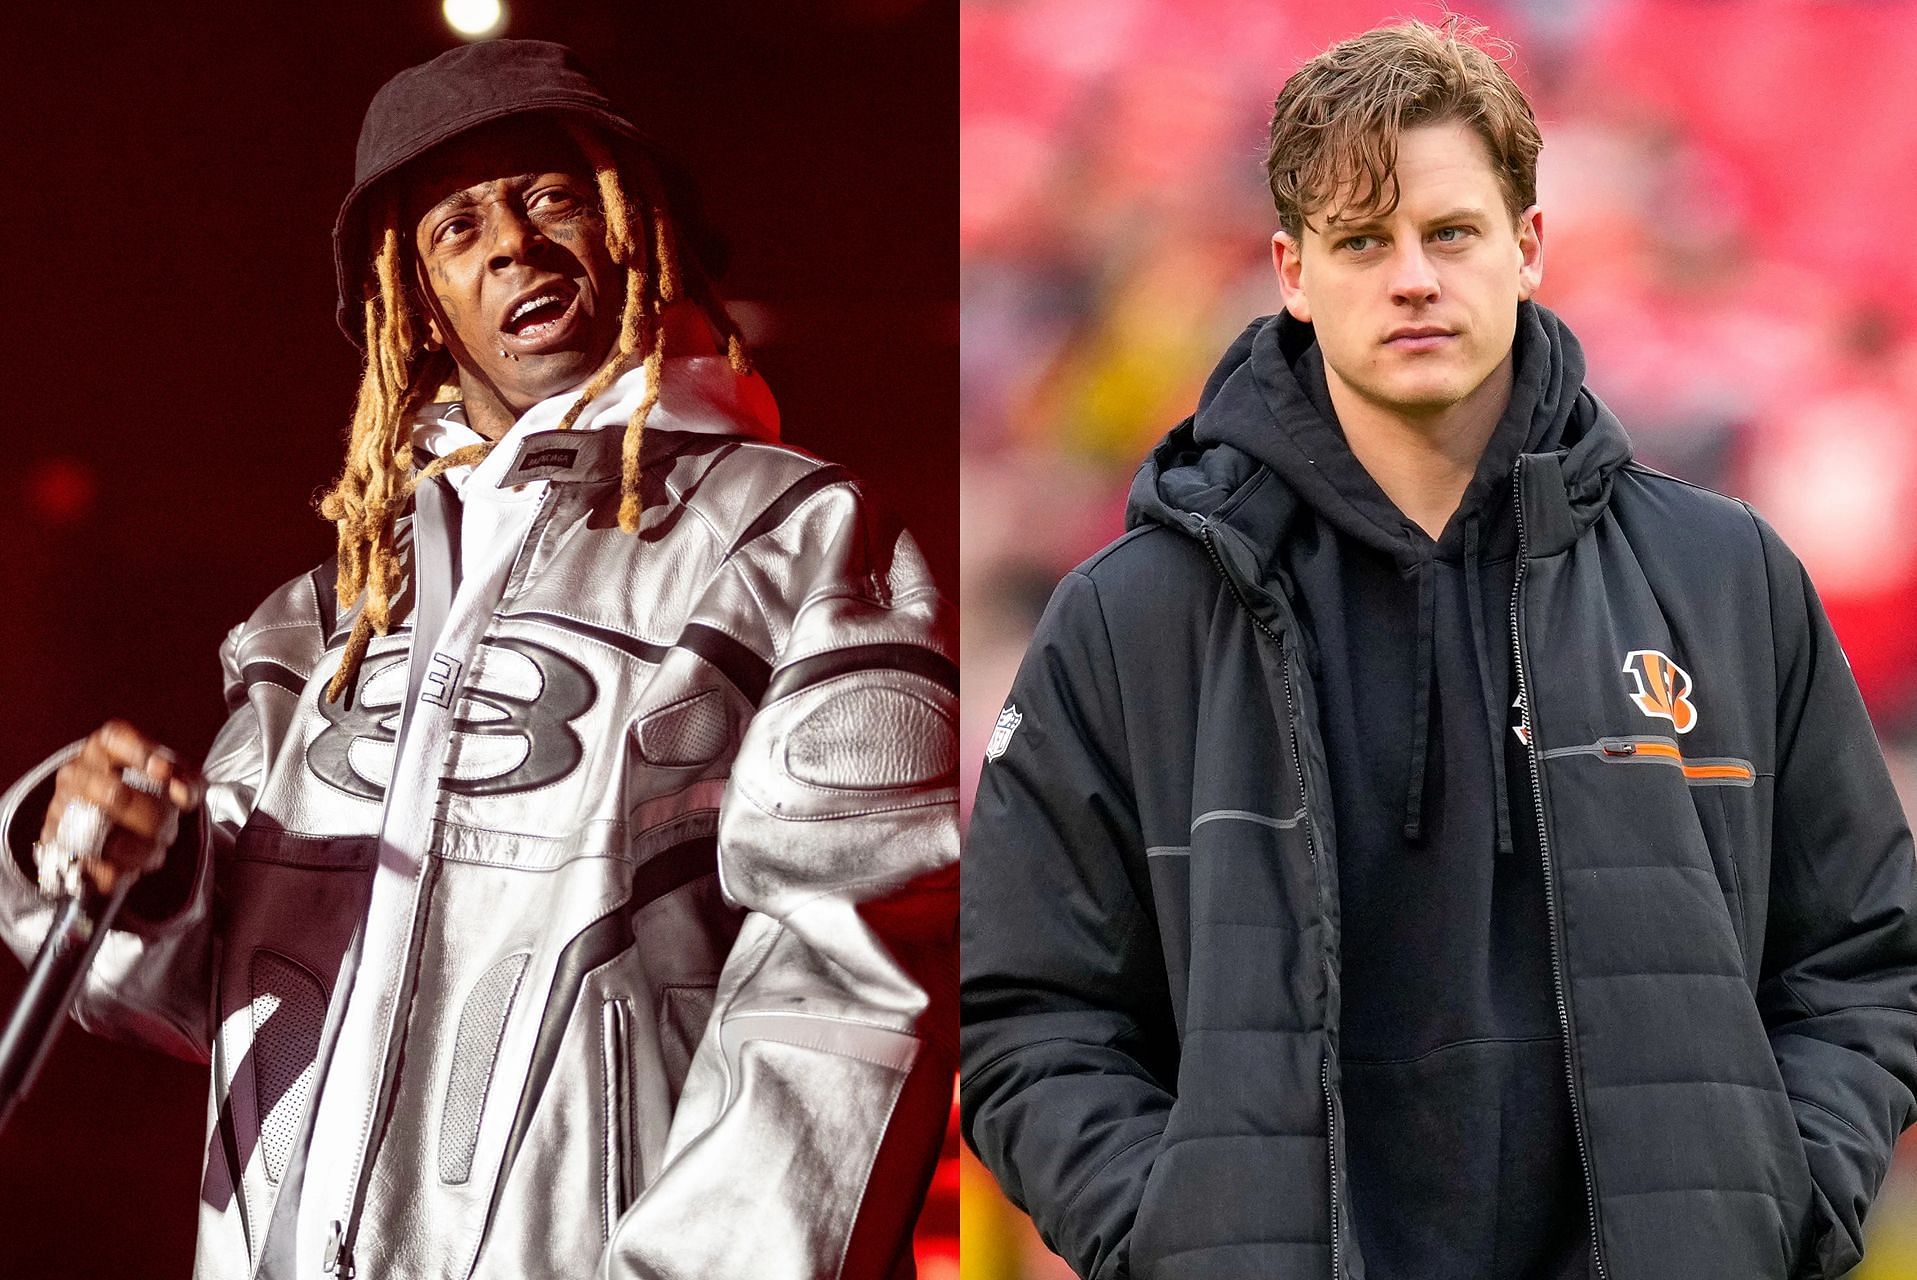 Lil Wayne shouts out Bengals QB Joe Burrow on his new song &ldquo;Came Out A Beast&rdquo; (Collage Image Credit: IMAGN)